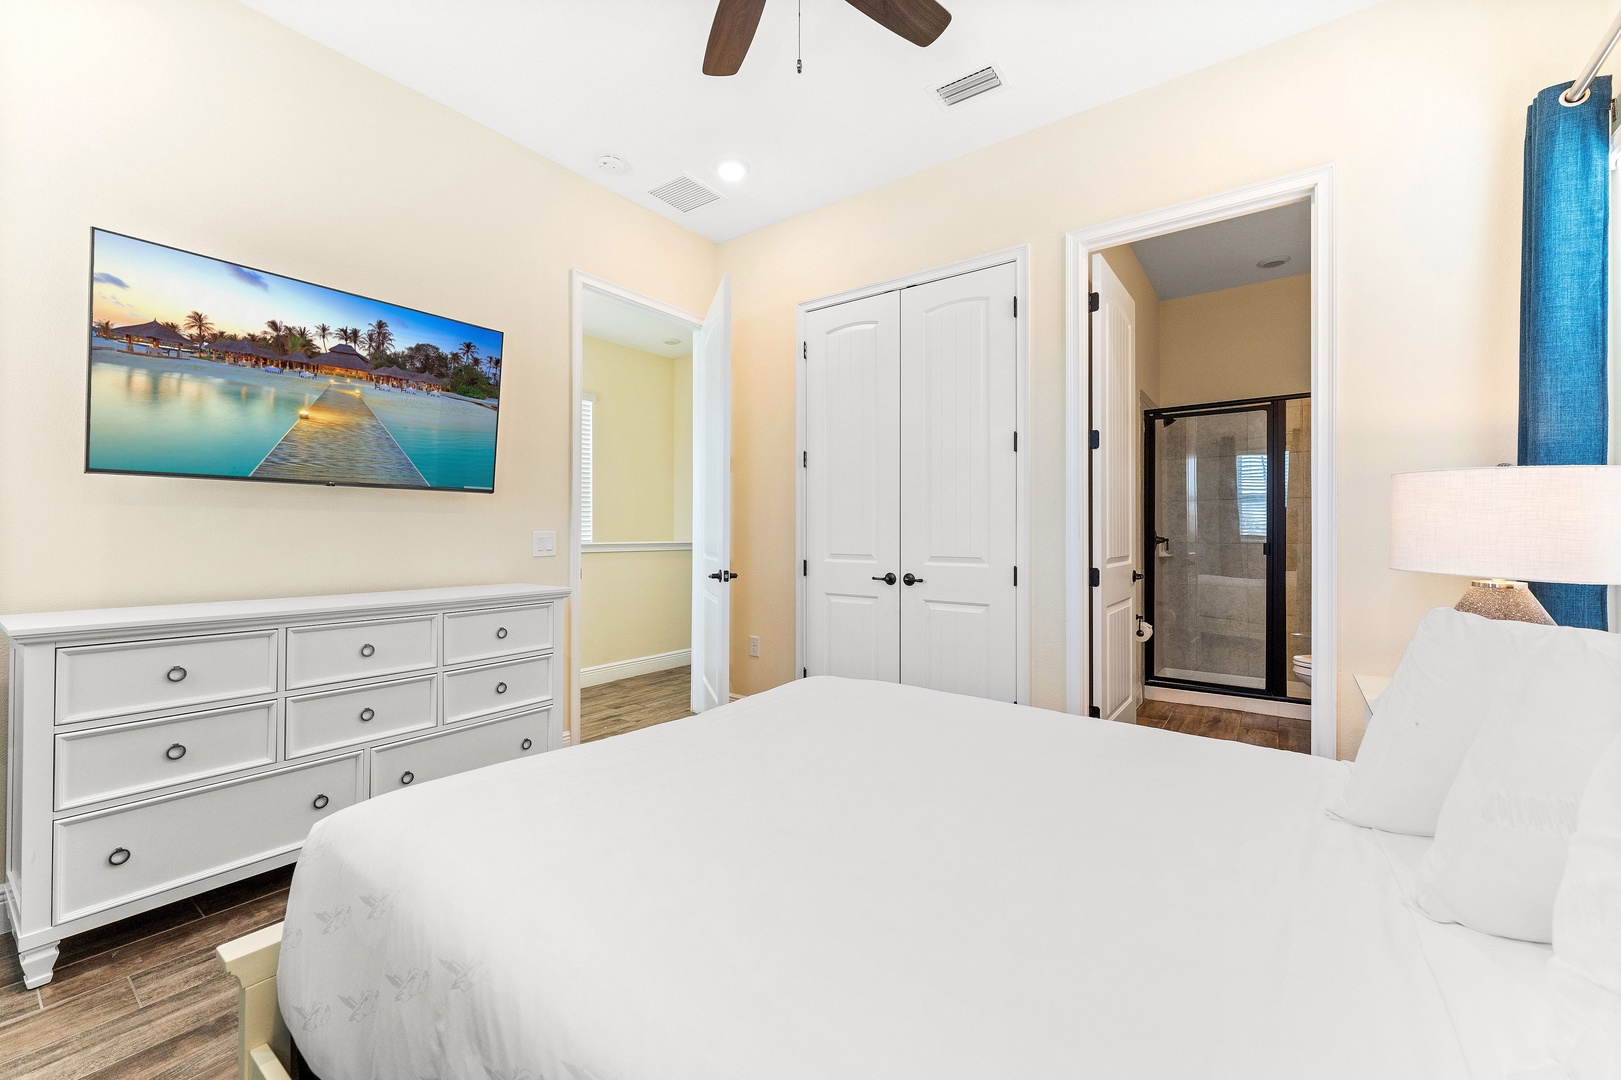 The second king suite showcases a Smart TV, private ensuite & patio access